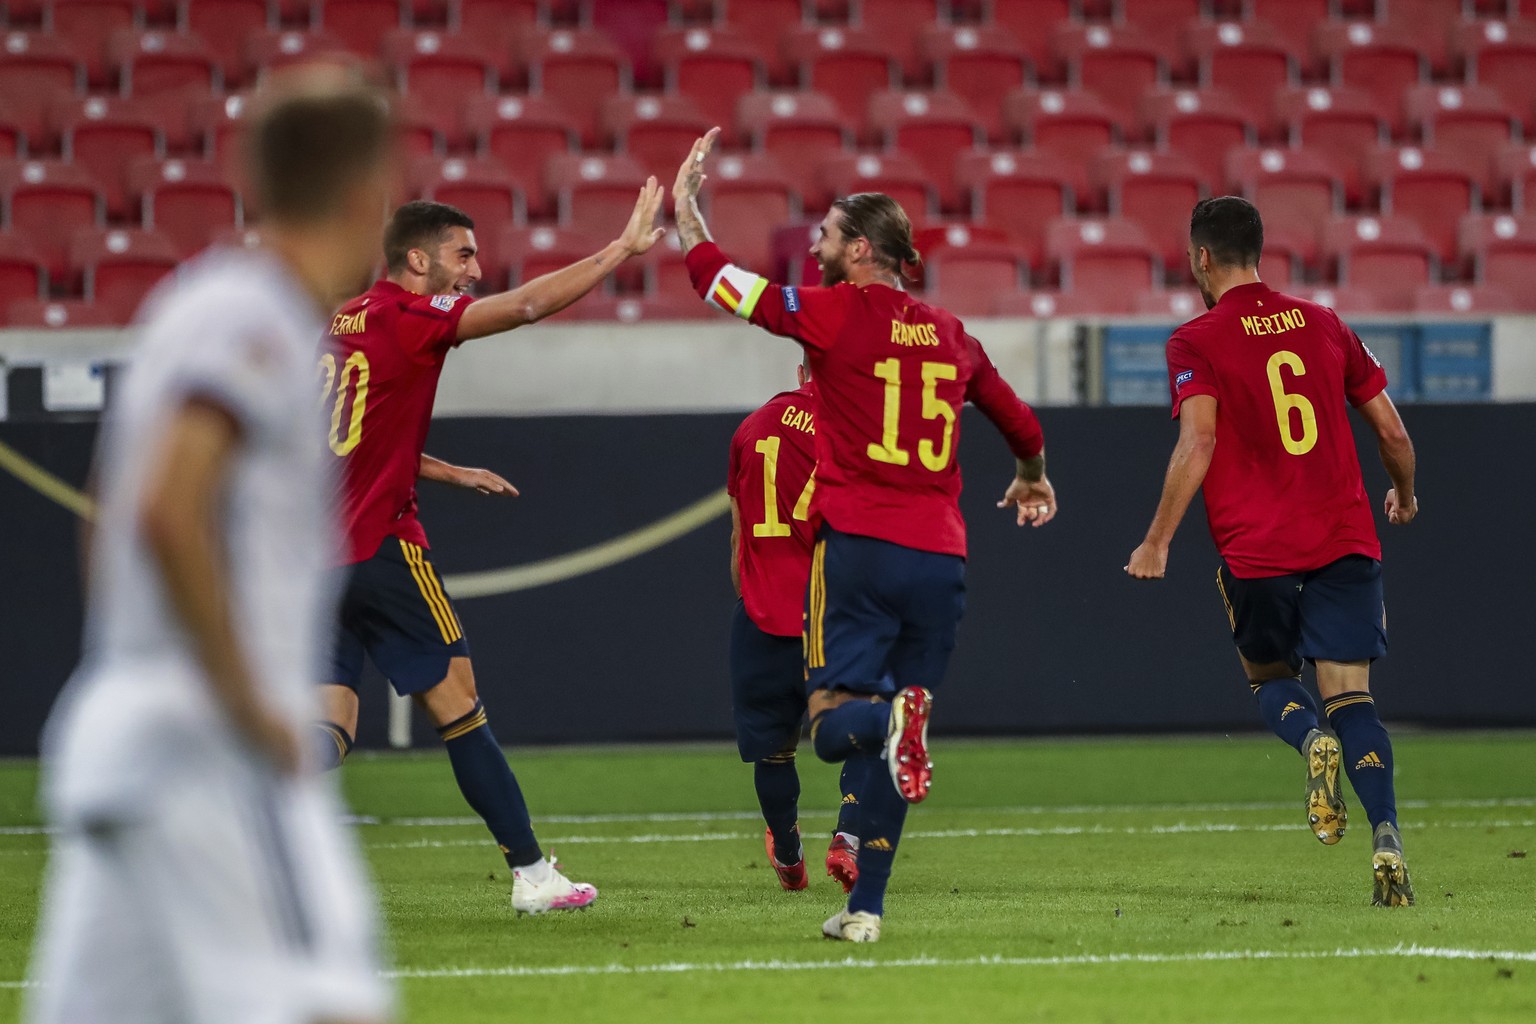 Spain players celebrate after scoring during the UEFA Nations League soccer match against Germany at the Mercedes-Benz Arena stadium in Stuttgart, Germany, Thursday, Sept. 3, 2020. (AP Photo/Matthias  ...